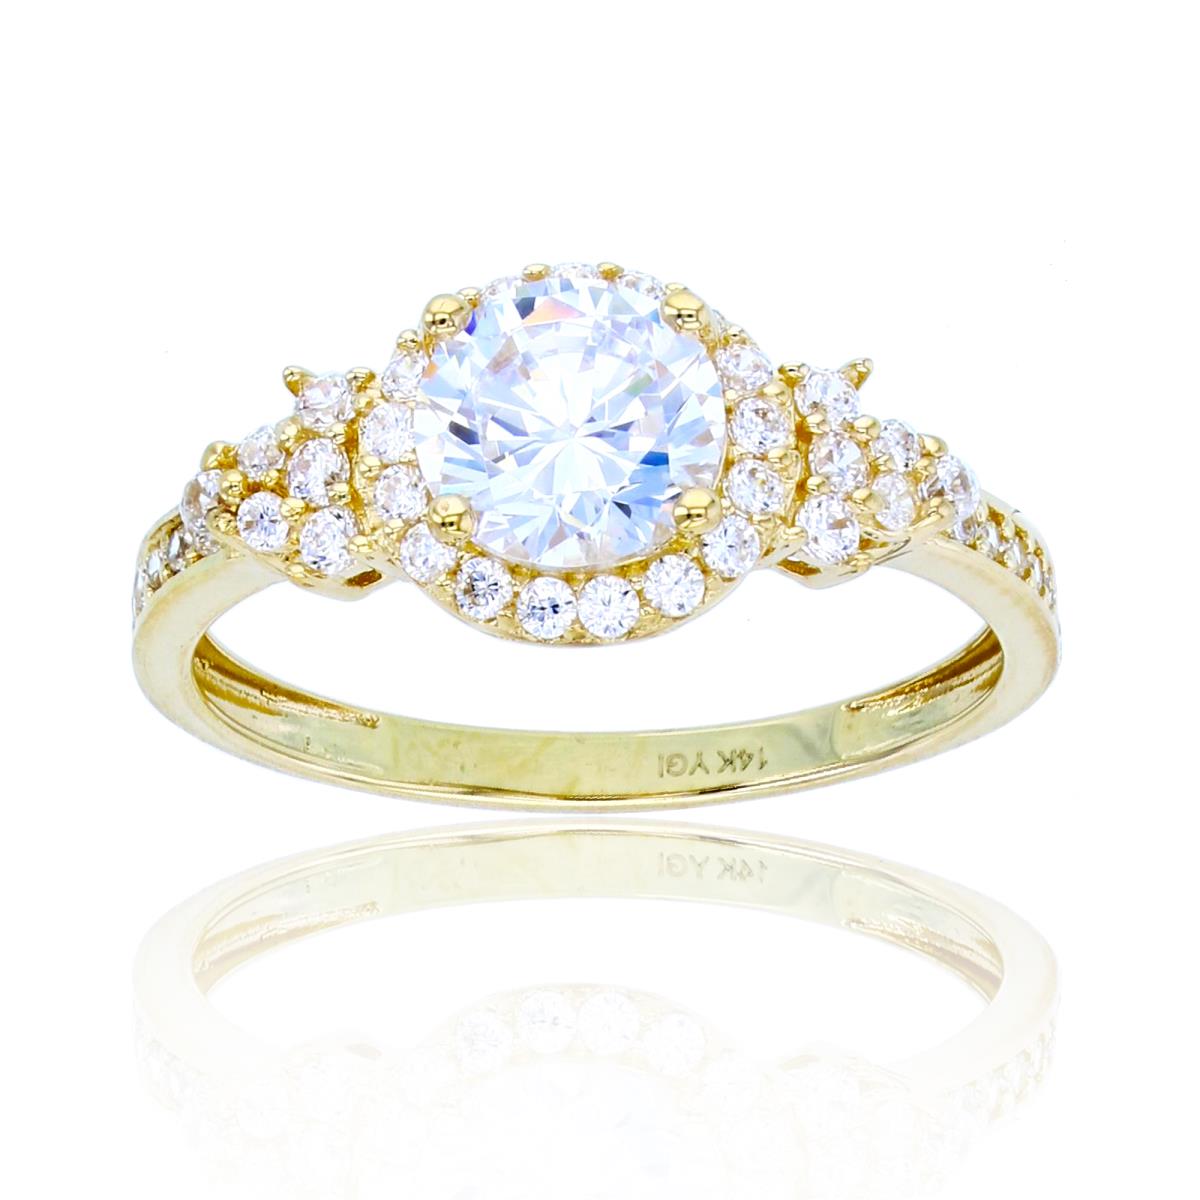 10K Yellow Gold 6.5mm Rnd CZ Center & CZ Trill on Side Halo Engagement Ring